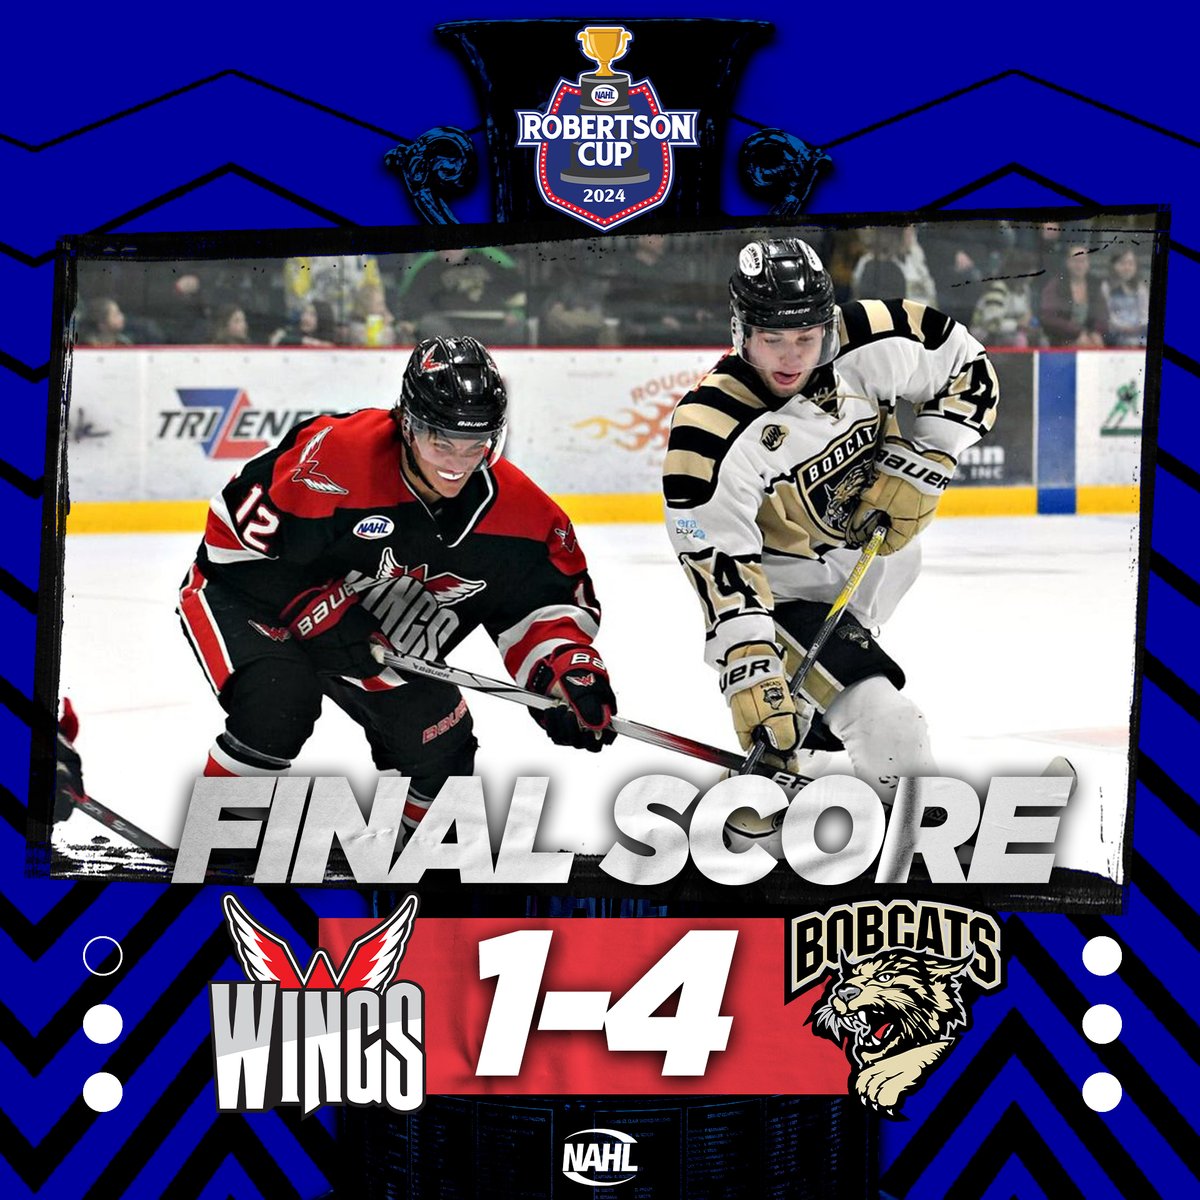 The Bobcats take care of business in Game 5! (📸 Shannon Schlinger) #RobertsonCup